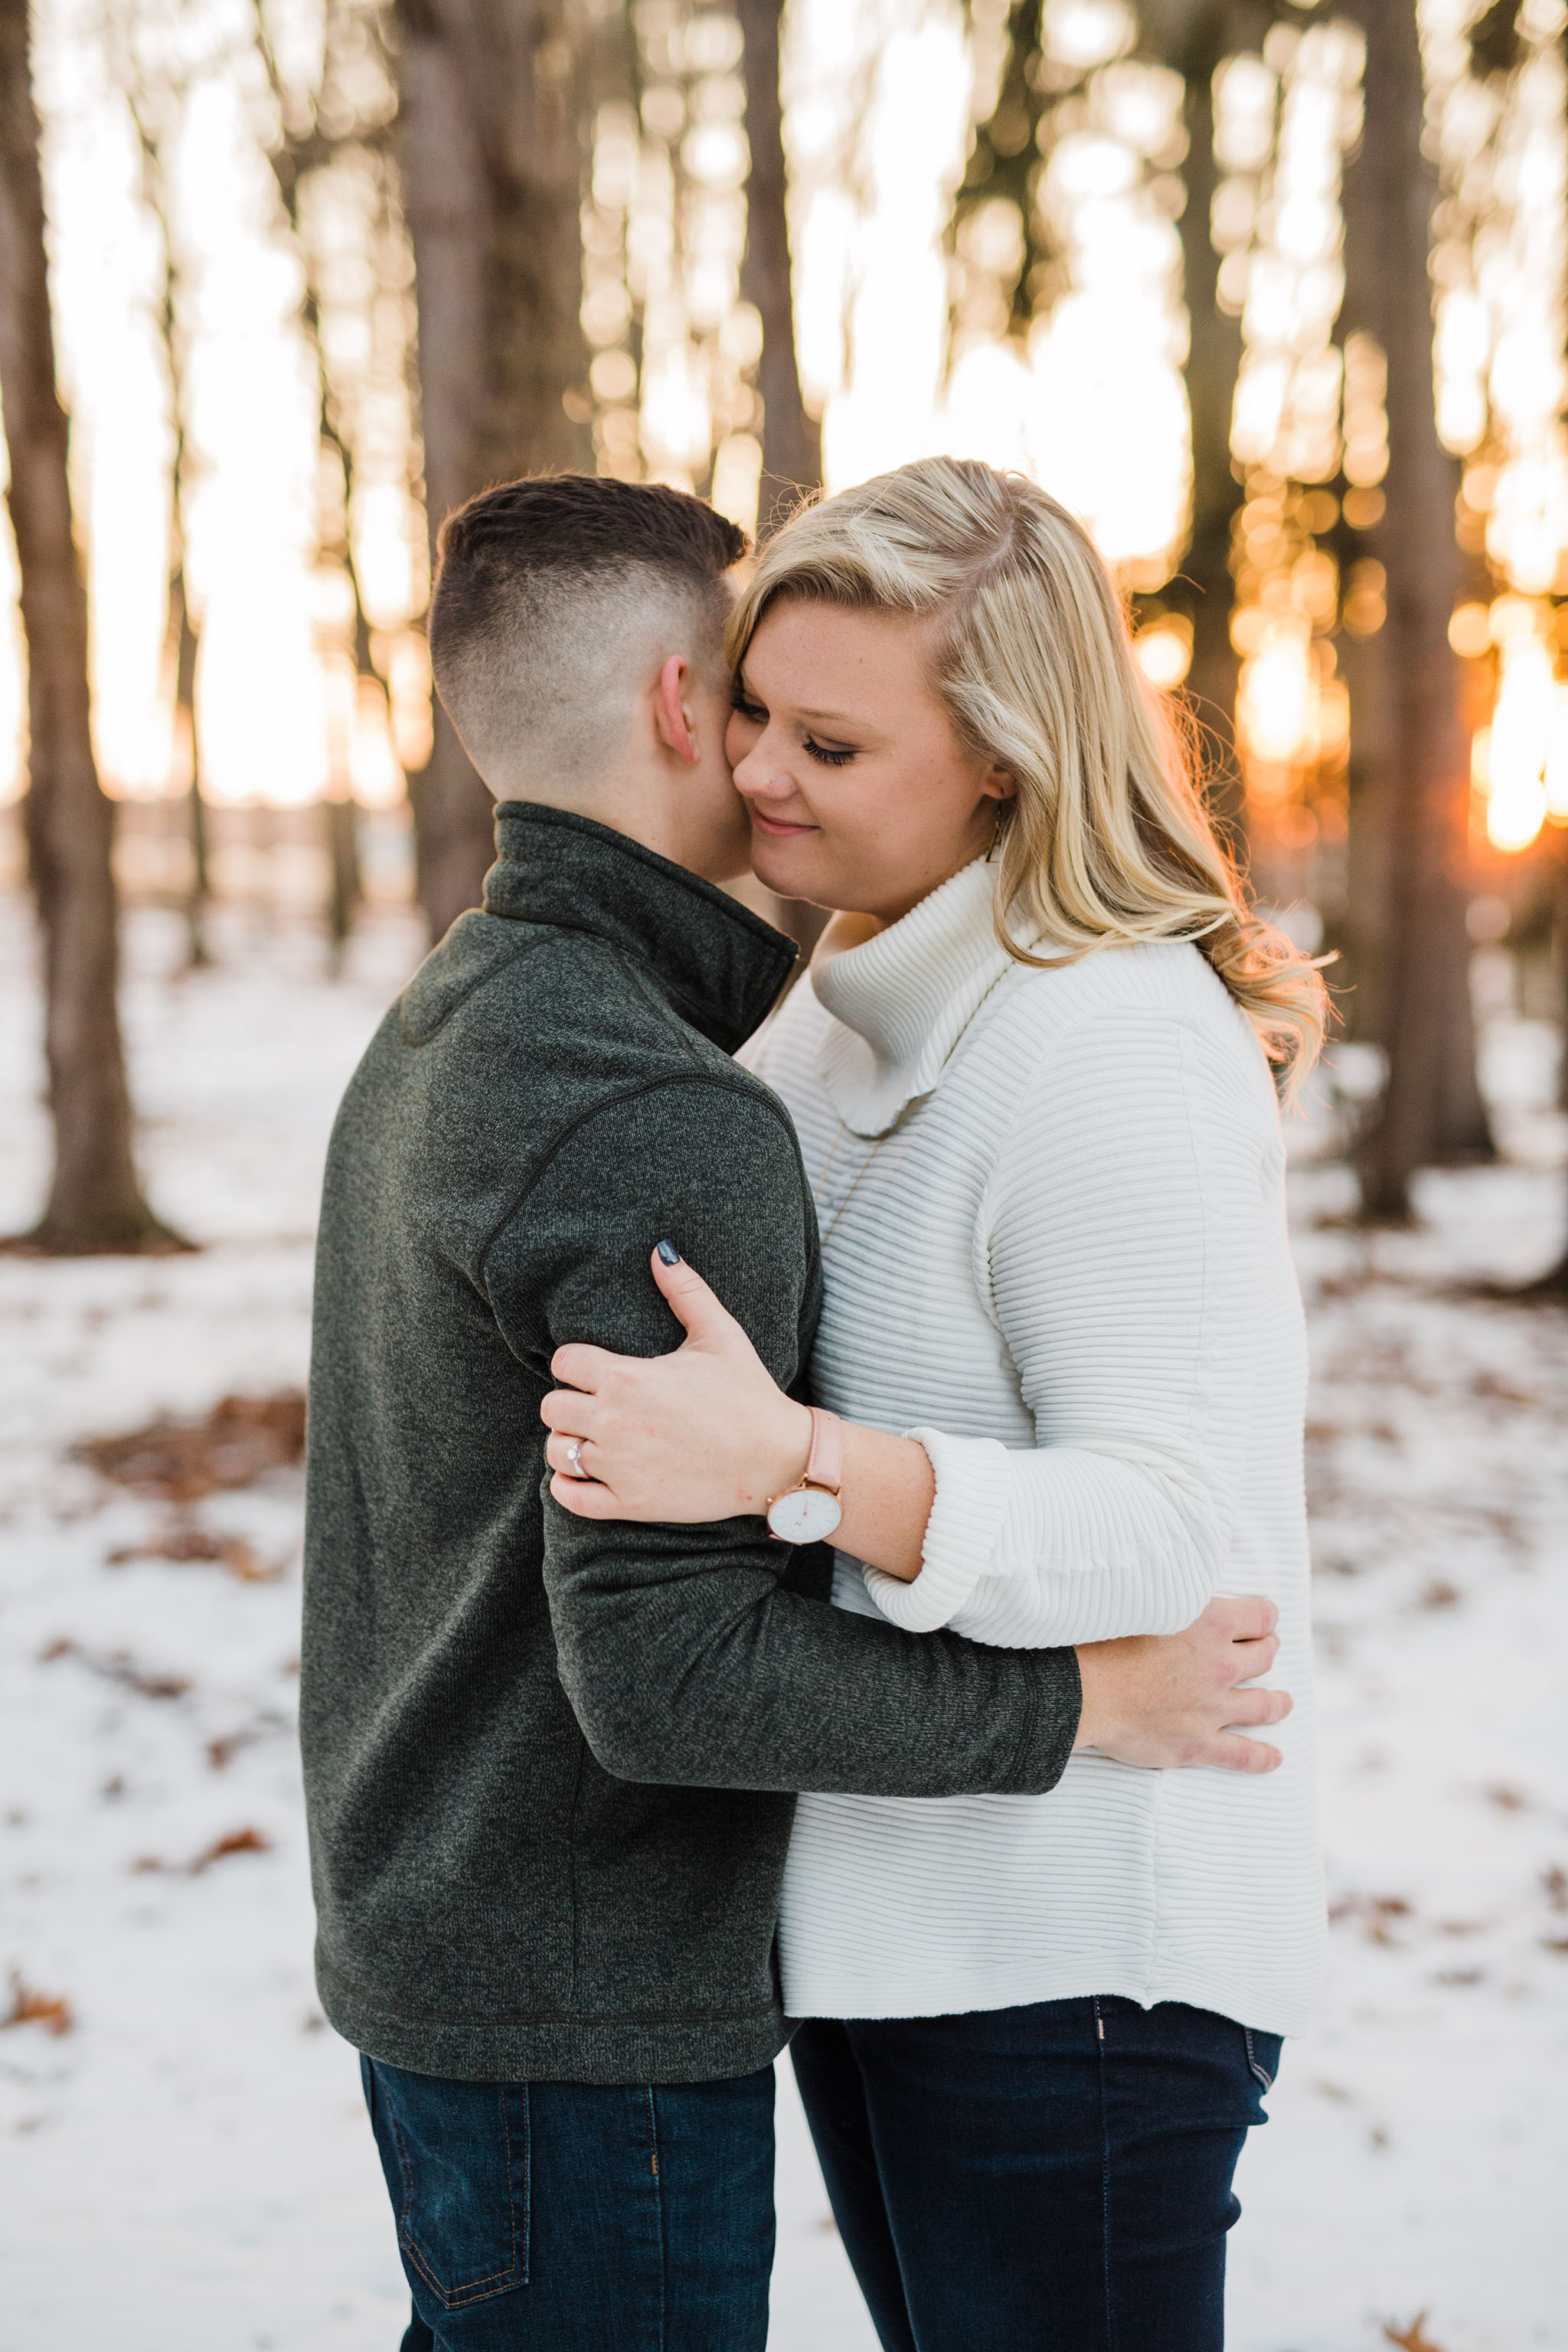 Alex and Hannahs Downtown Wooster Engagement Session | Wooster Ohio Wedding and Engagement Photographer | Tiffany Reiff Designs and Photography